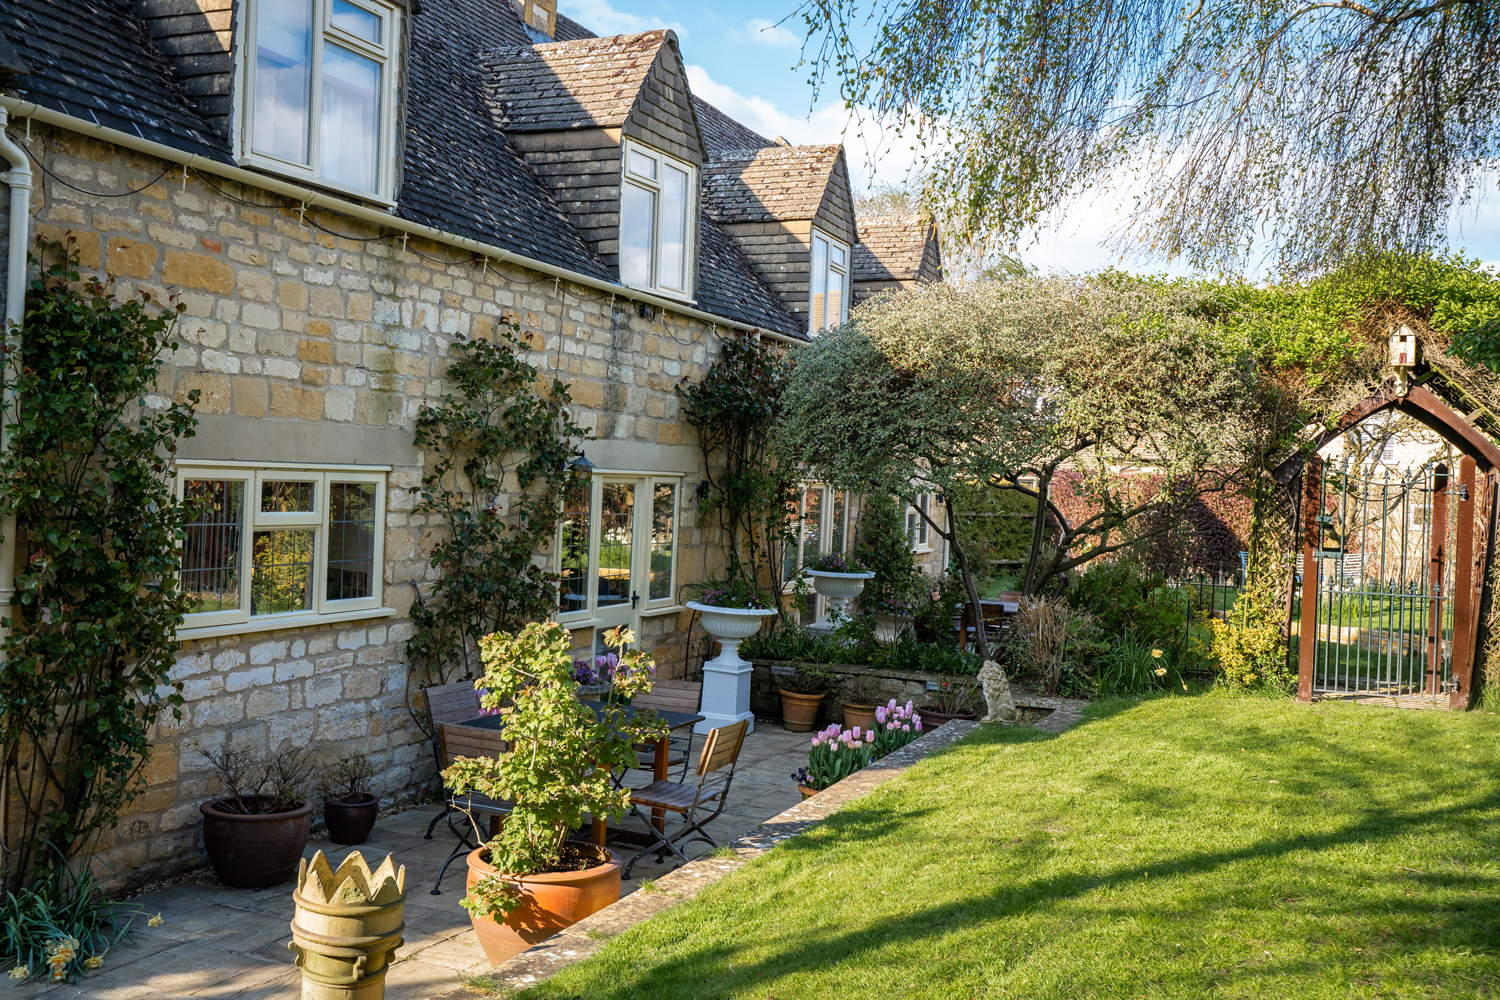 Cotswolds Holiday Cottages